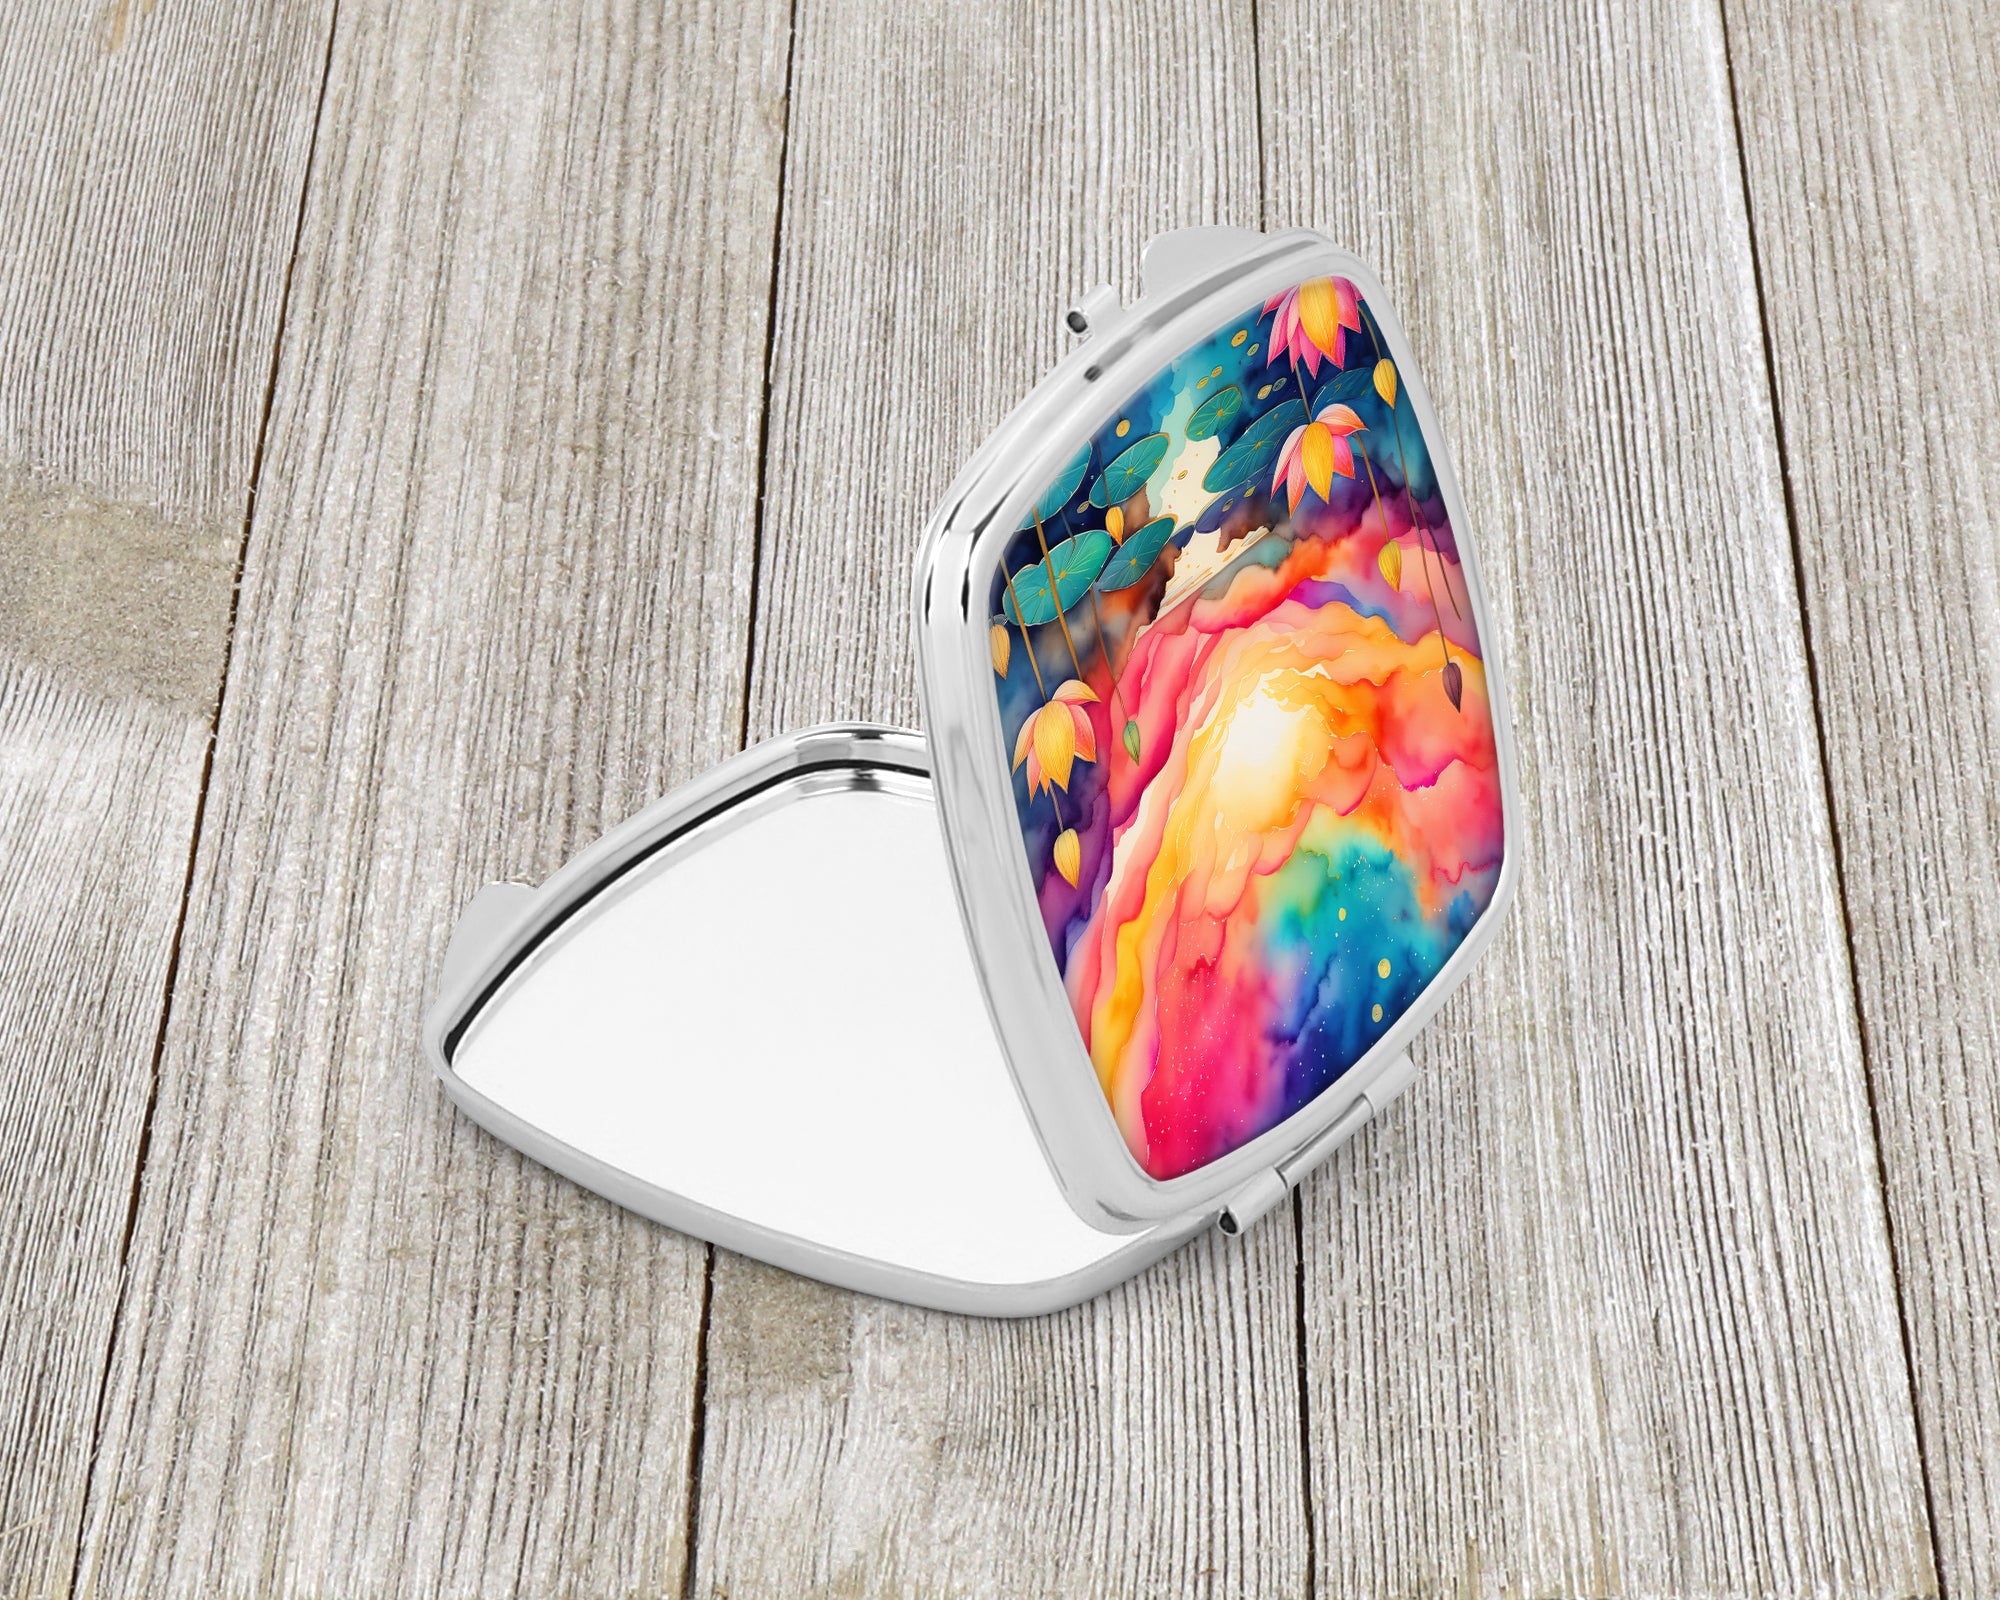 Buy this Colorful Lotus Compact Mirror